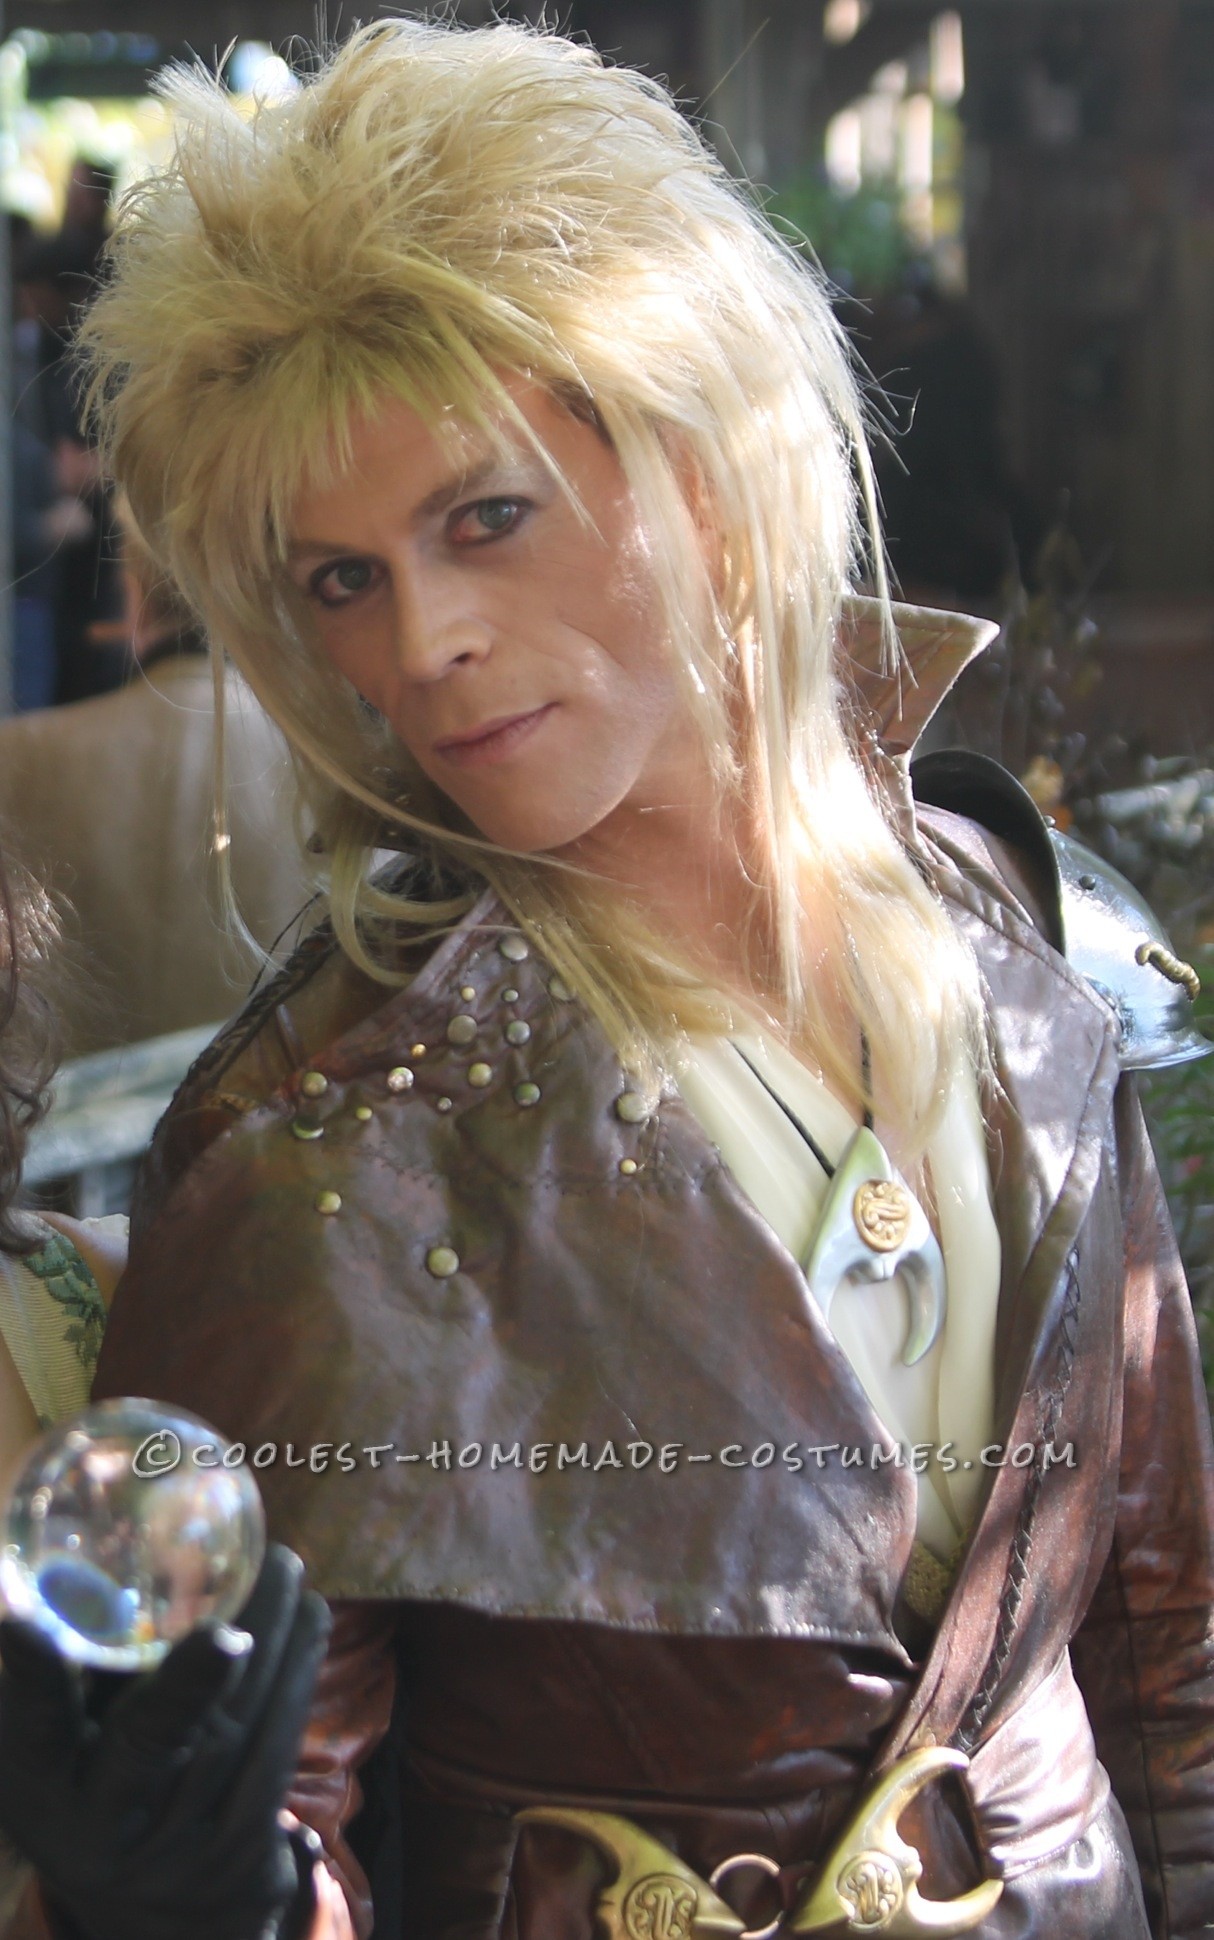 Coolest King Jareth from Labyrinth Homemade Costume